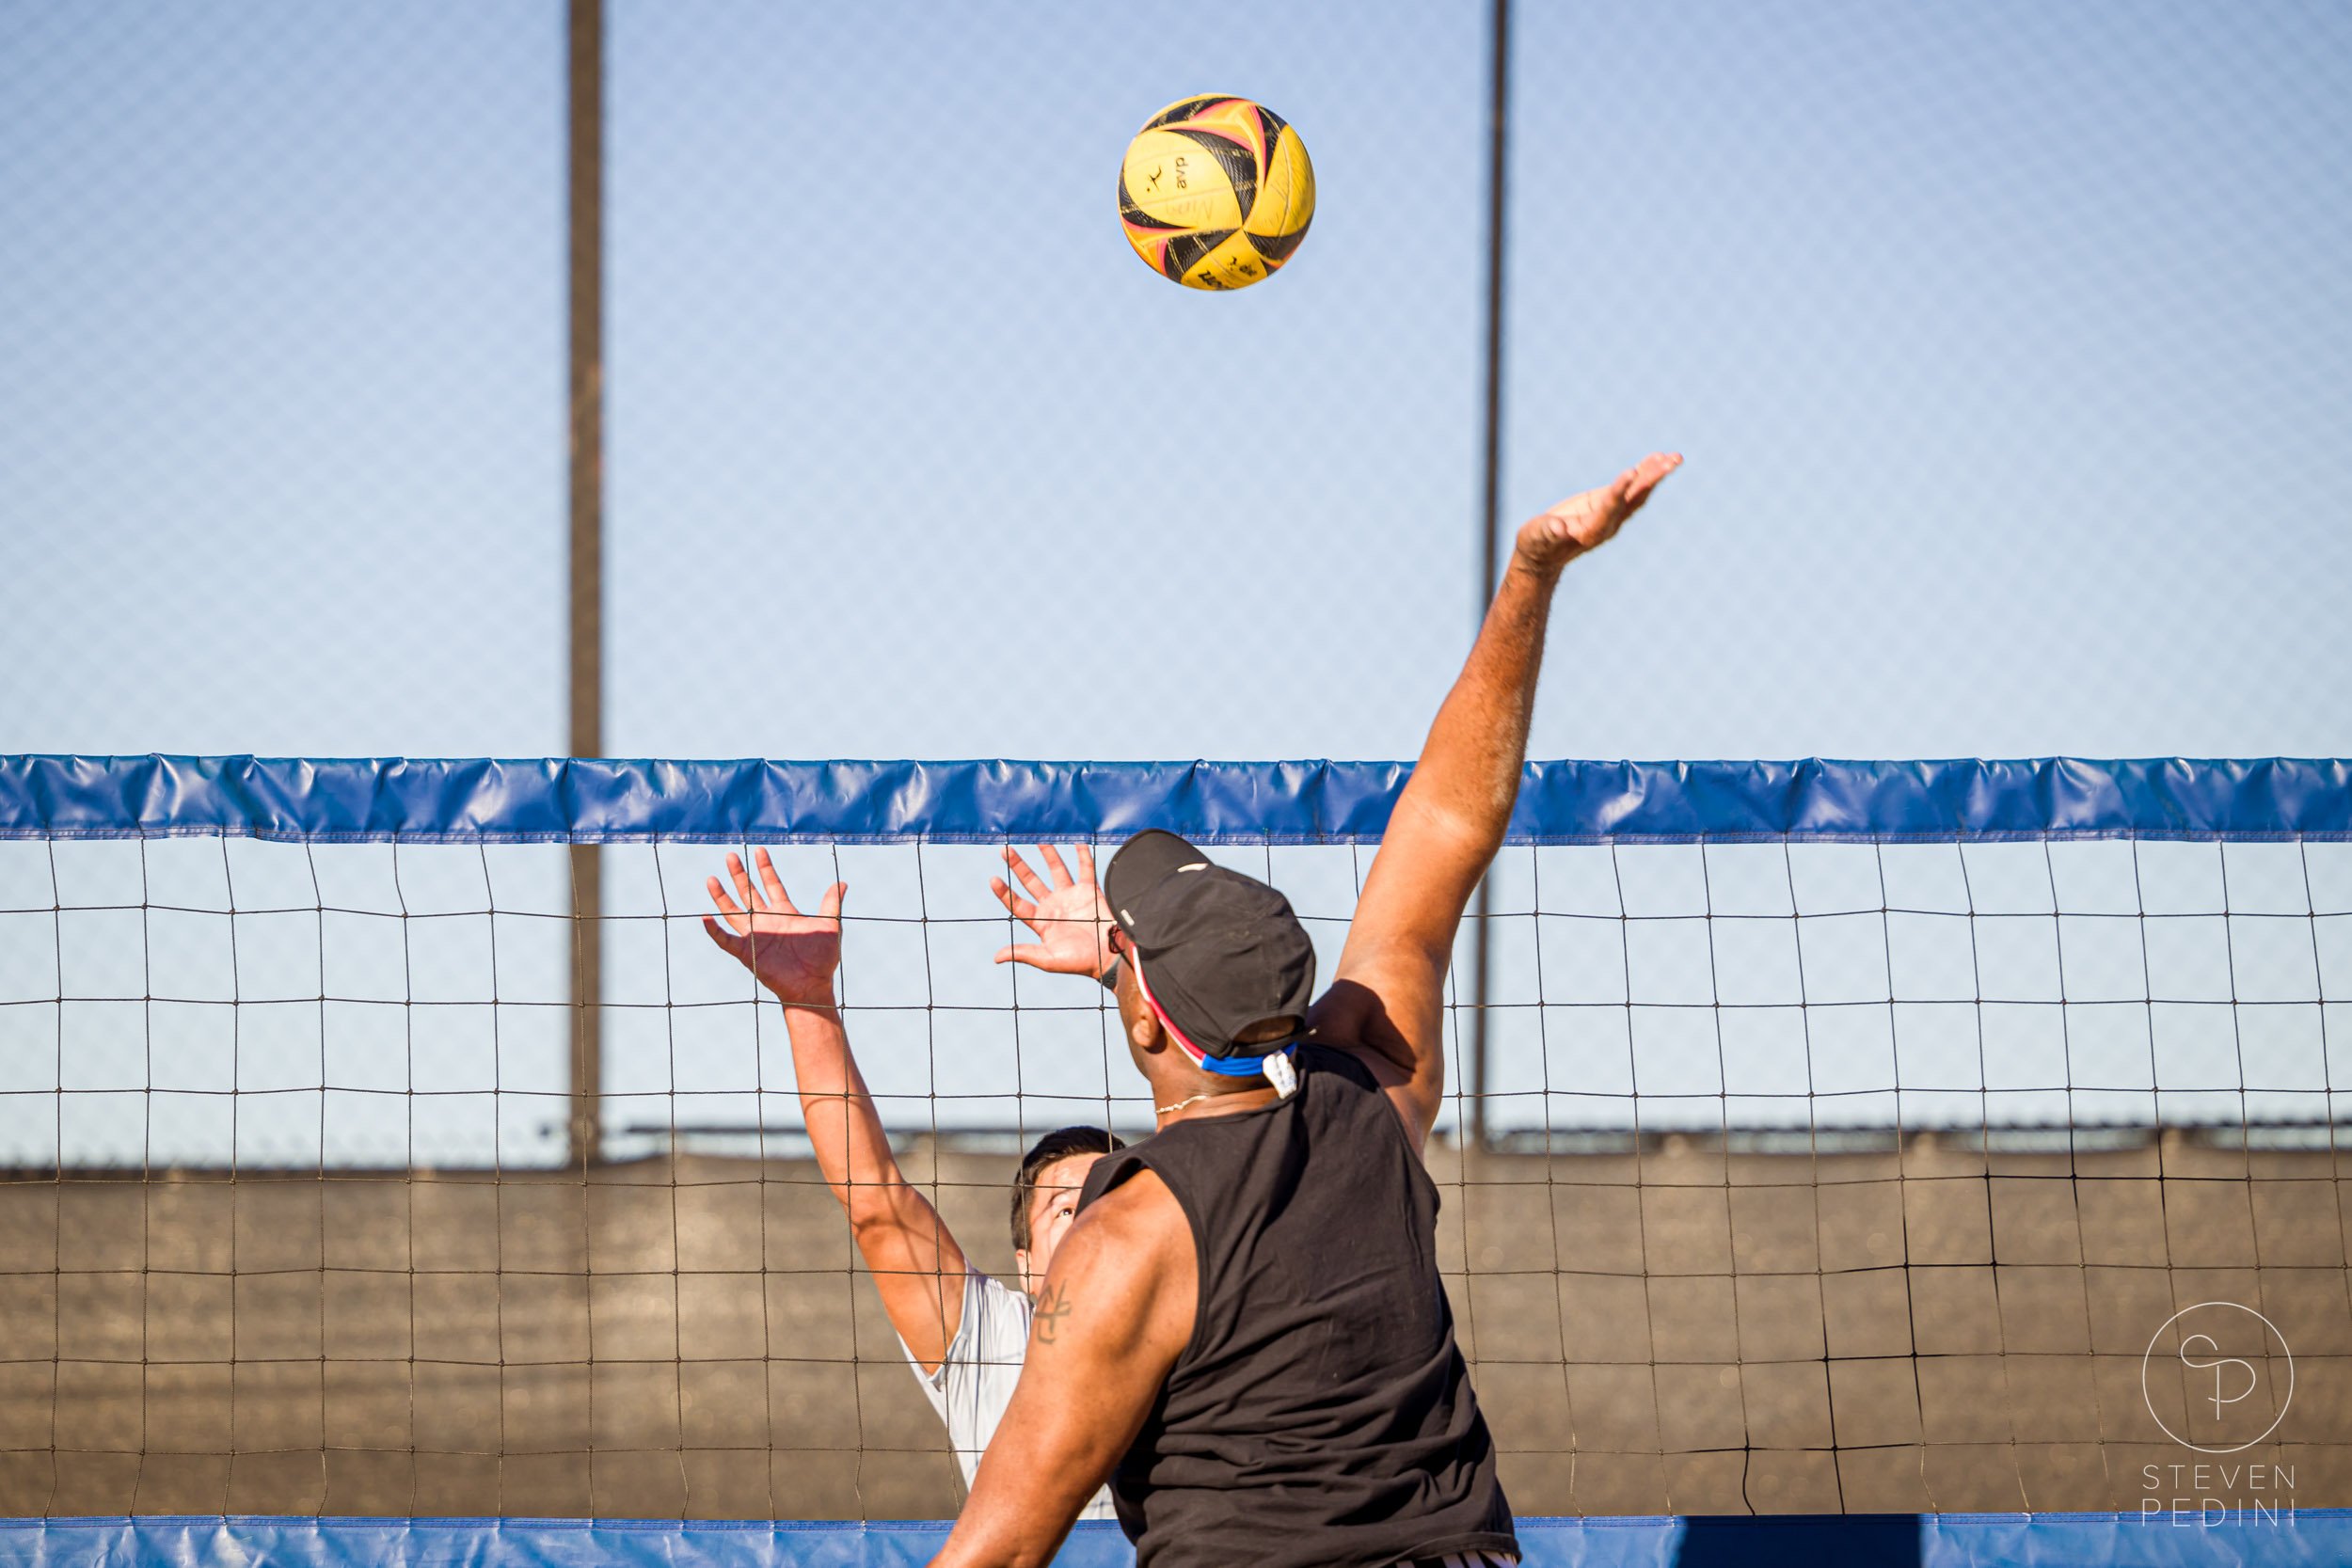 Steven Pedini Photography - Bumpy Pickle - Sand Volleyball - Houston TX - World Cup of Volleyball - 00048.jpg